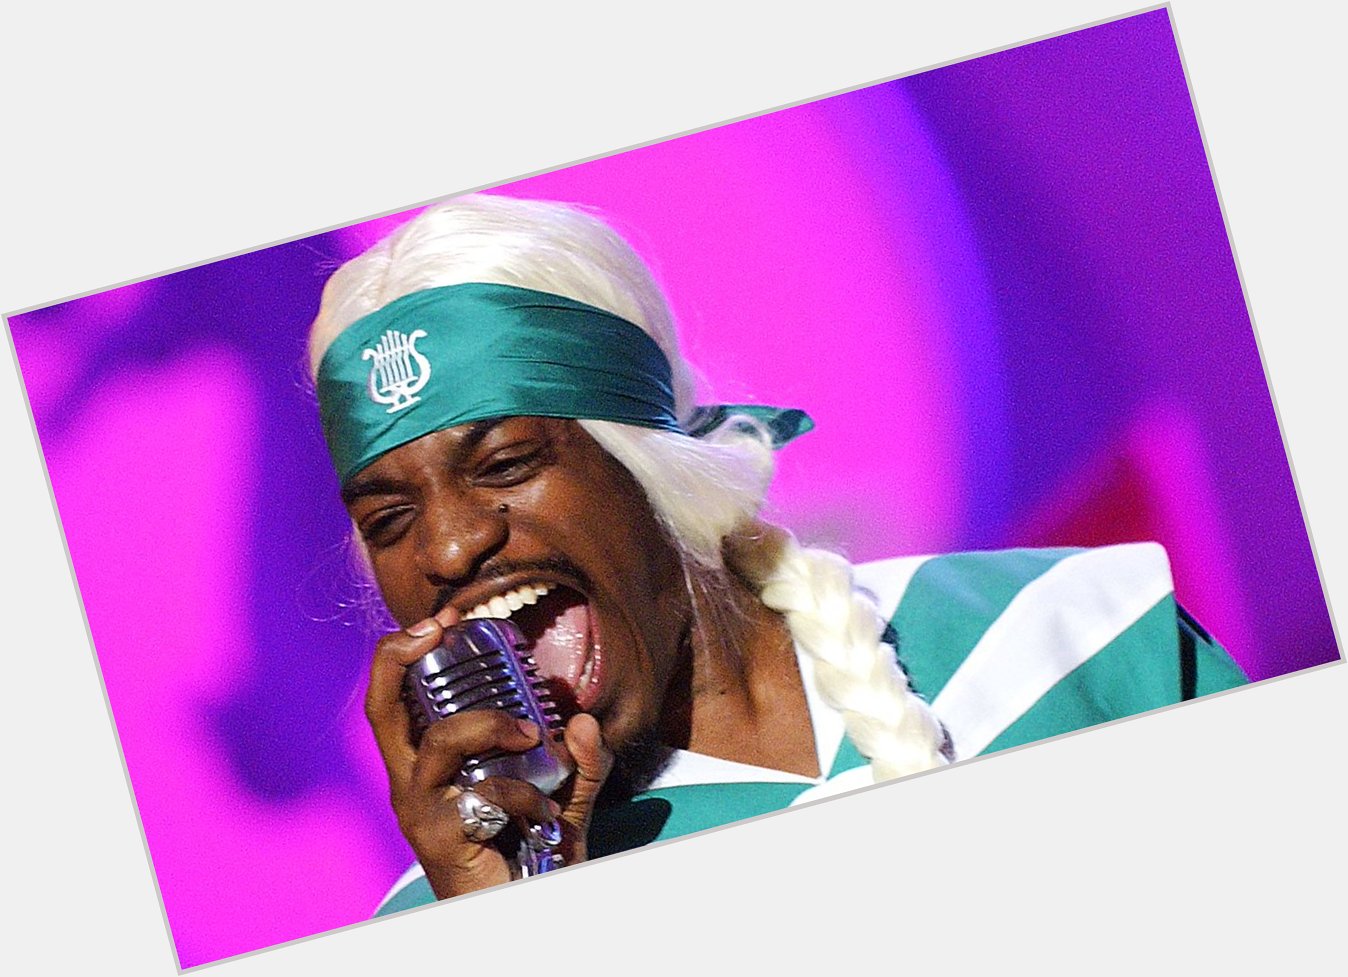 Happy birthday Andrè 3000! Check out our 2014 interview with the Outkast rapper  